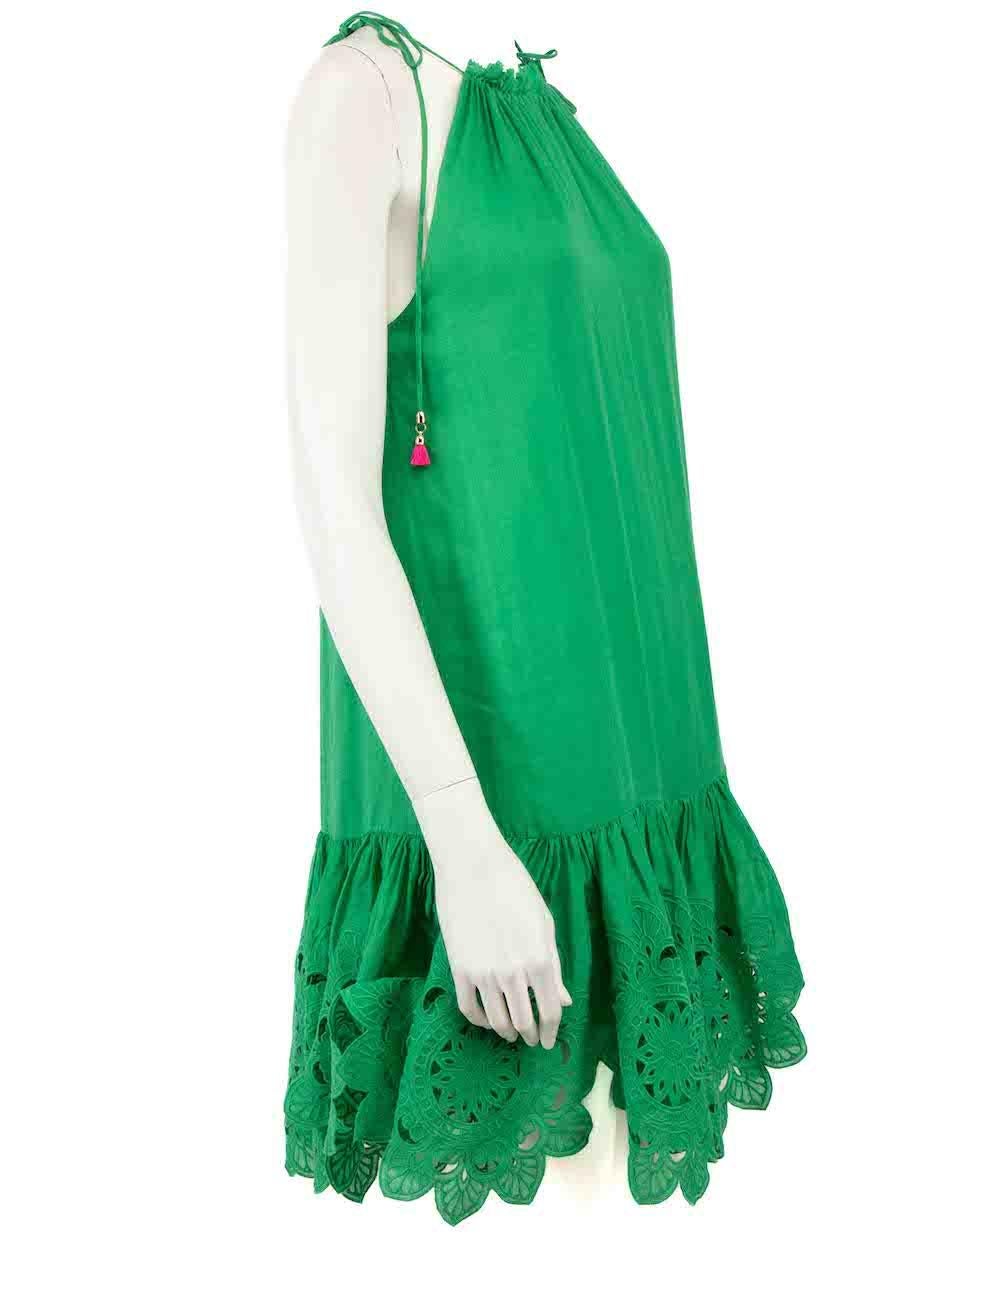 CONDITION is Very good. Hardly any visible wear to dress is evident on this used Zimmermann designer resale item.
 
 Details
 Green
 Ramie
 Dress
 Sleeveless
 Round neck
 Knee length
 Lace ruffle hem
 Drawstring neck detail
 Tied shoulder straps
 
